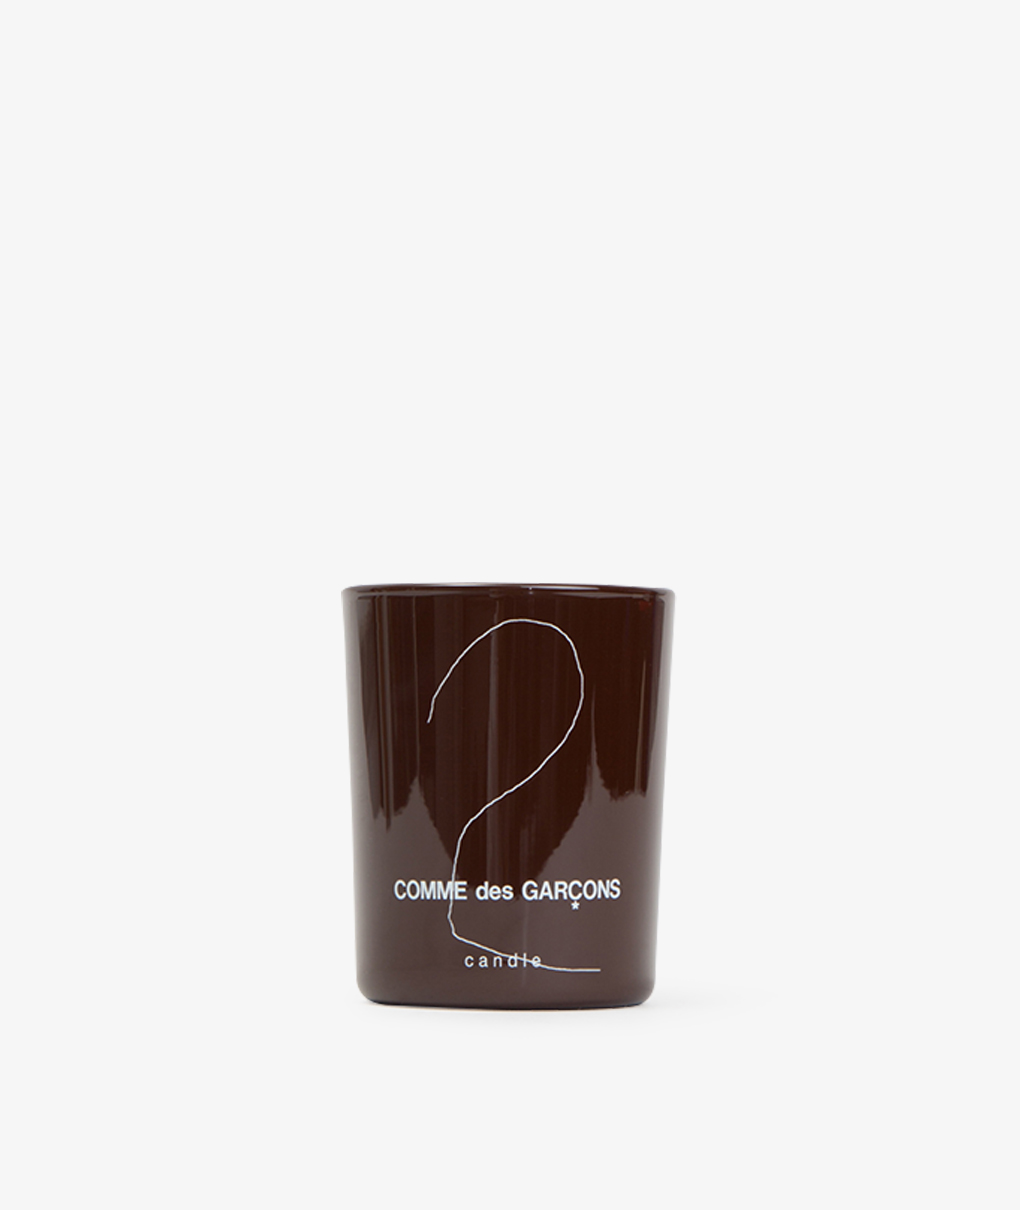 Give Arkitektur global Norse Store | Shipping Worldwide - CDG Candle